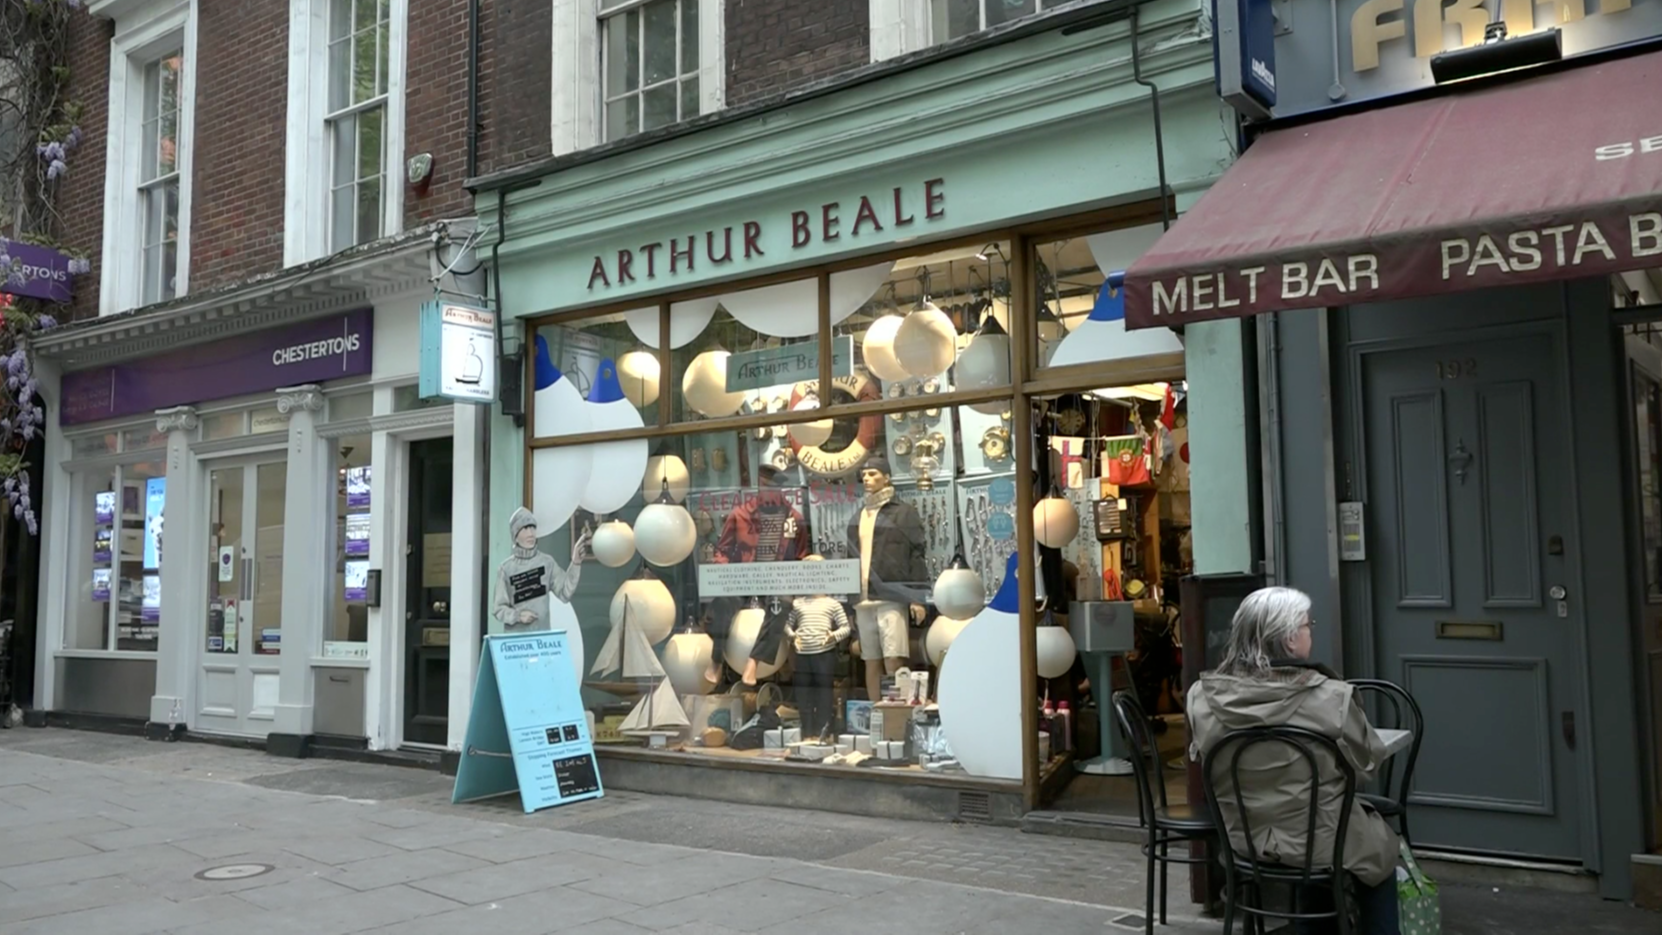 Farewell, Arthur Beale – the sailors' and fashionistas' favourite, shutting  up shop after 500 years